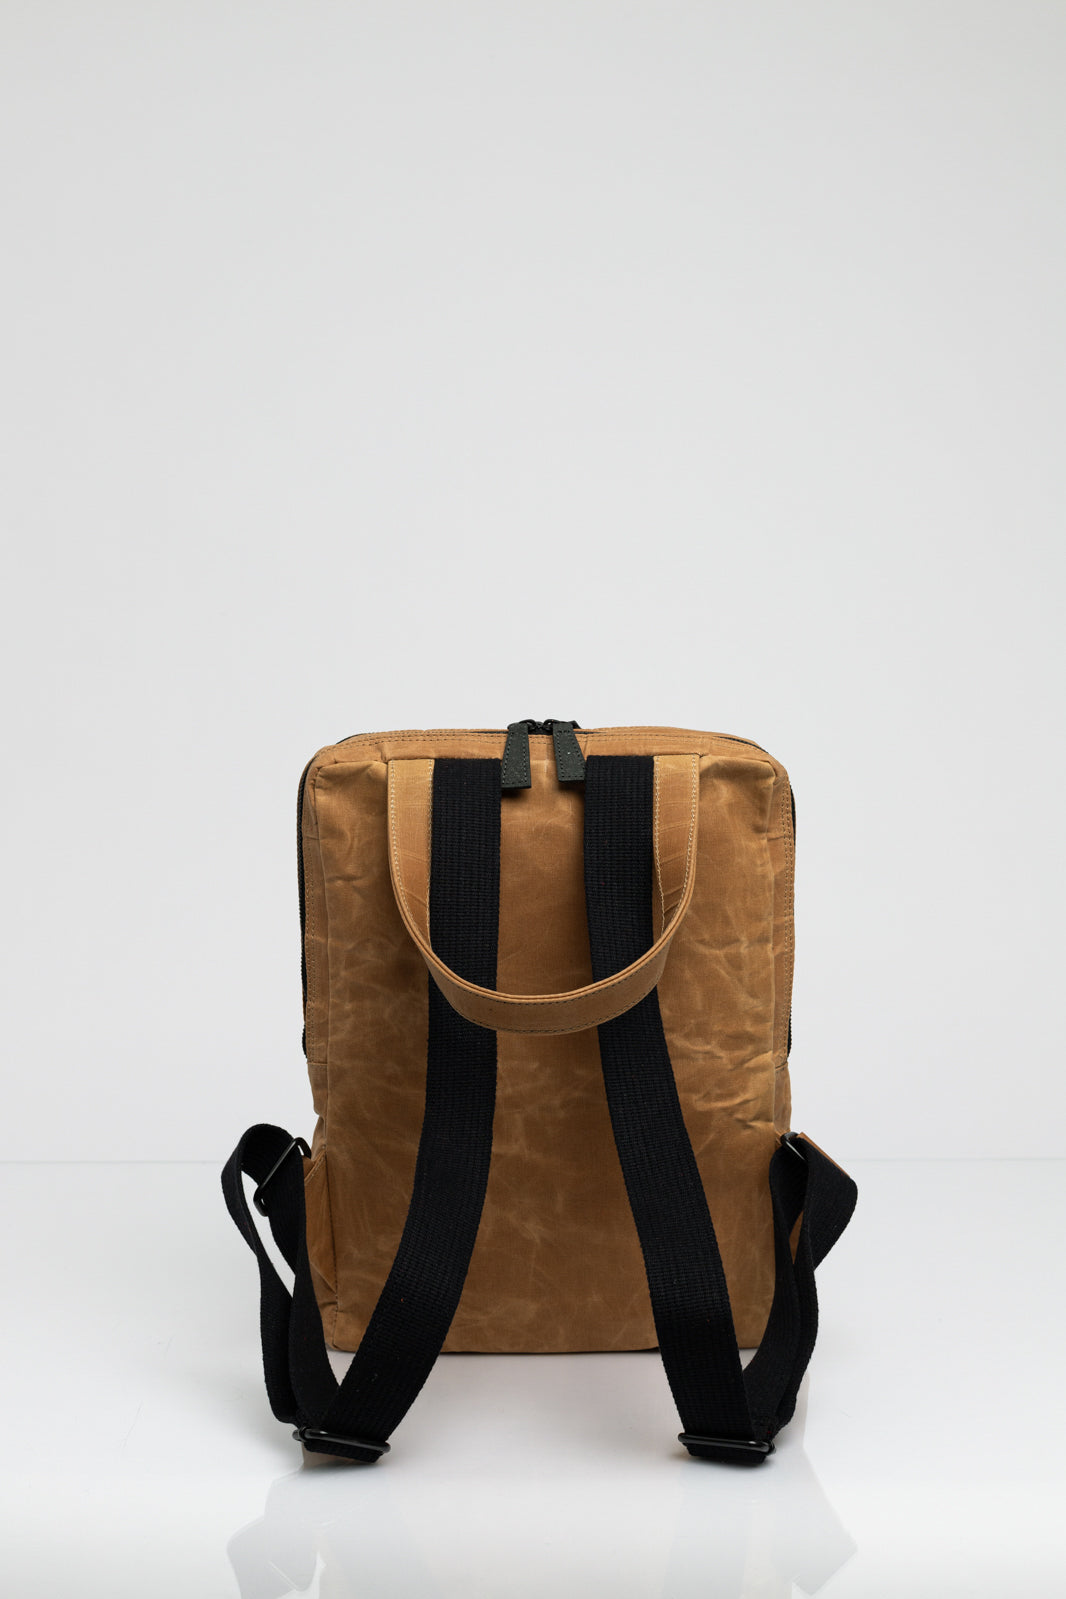 Holborn brown vintage beeswaxed cotton backpack